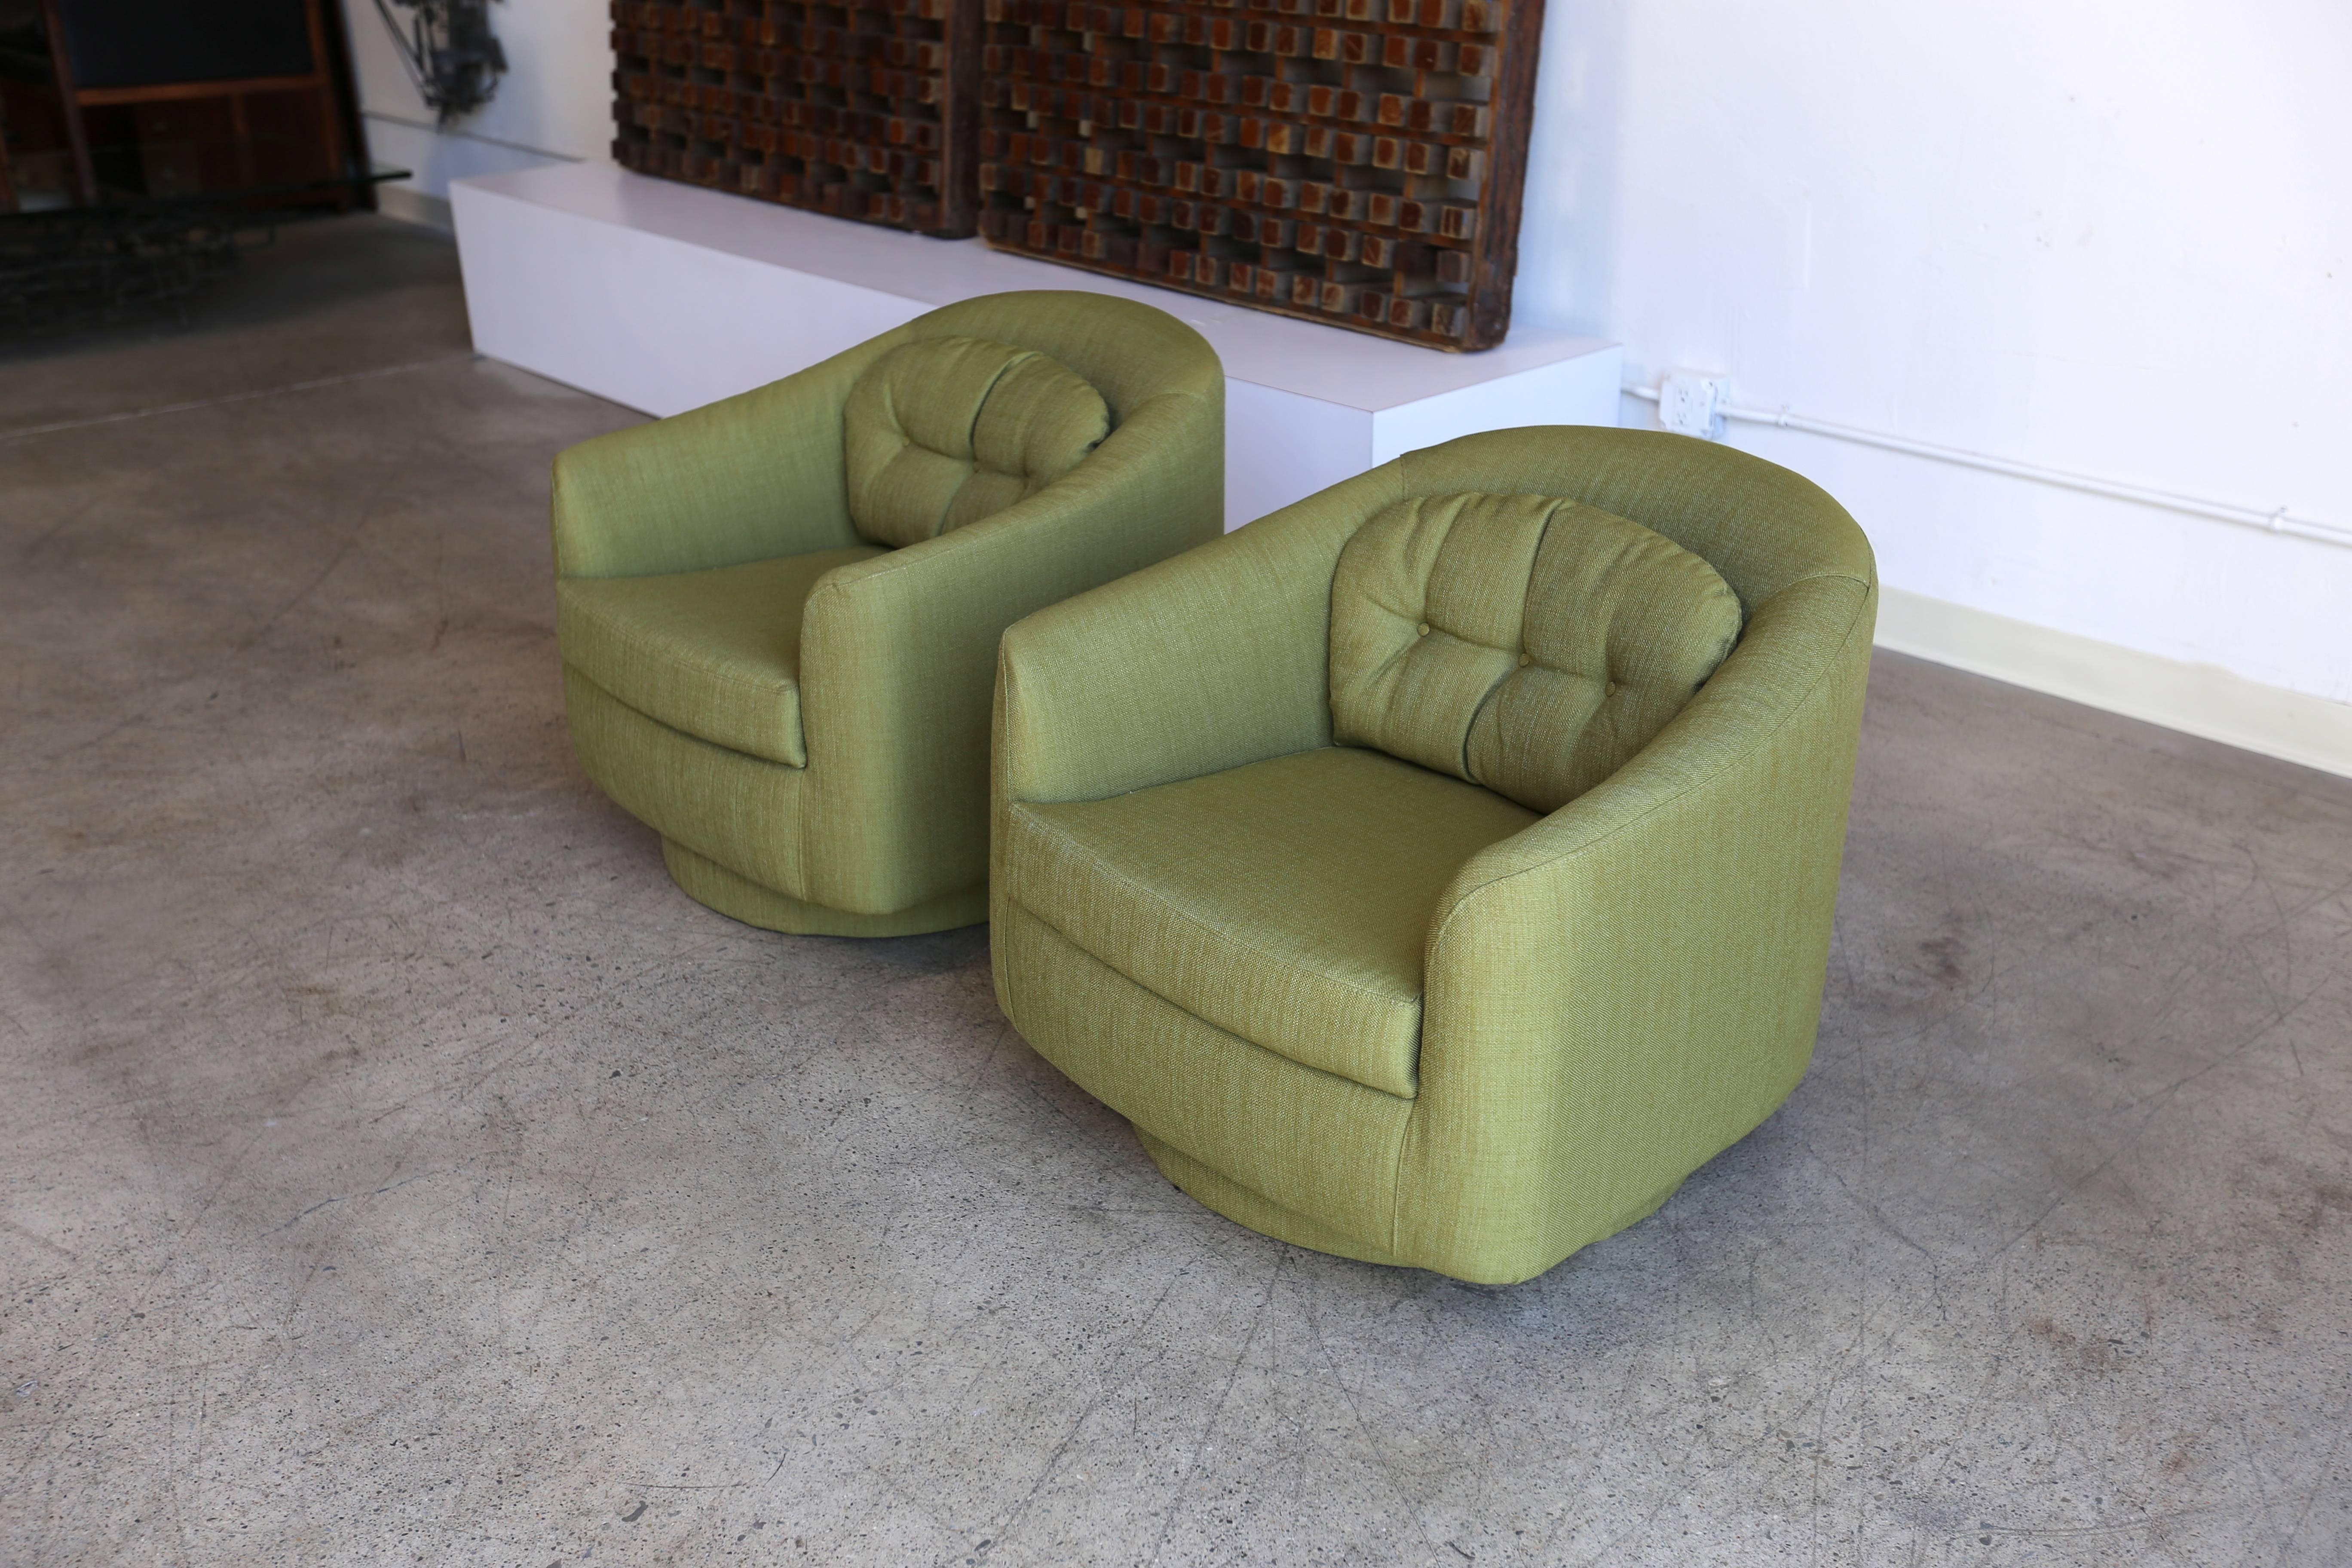 Pair of swivel and tilt lounge chairs by Milo Baughman for Directional.